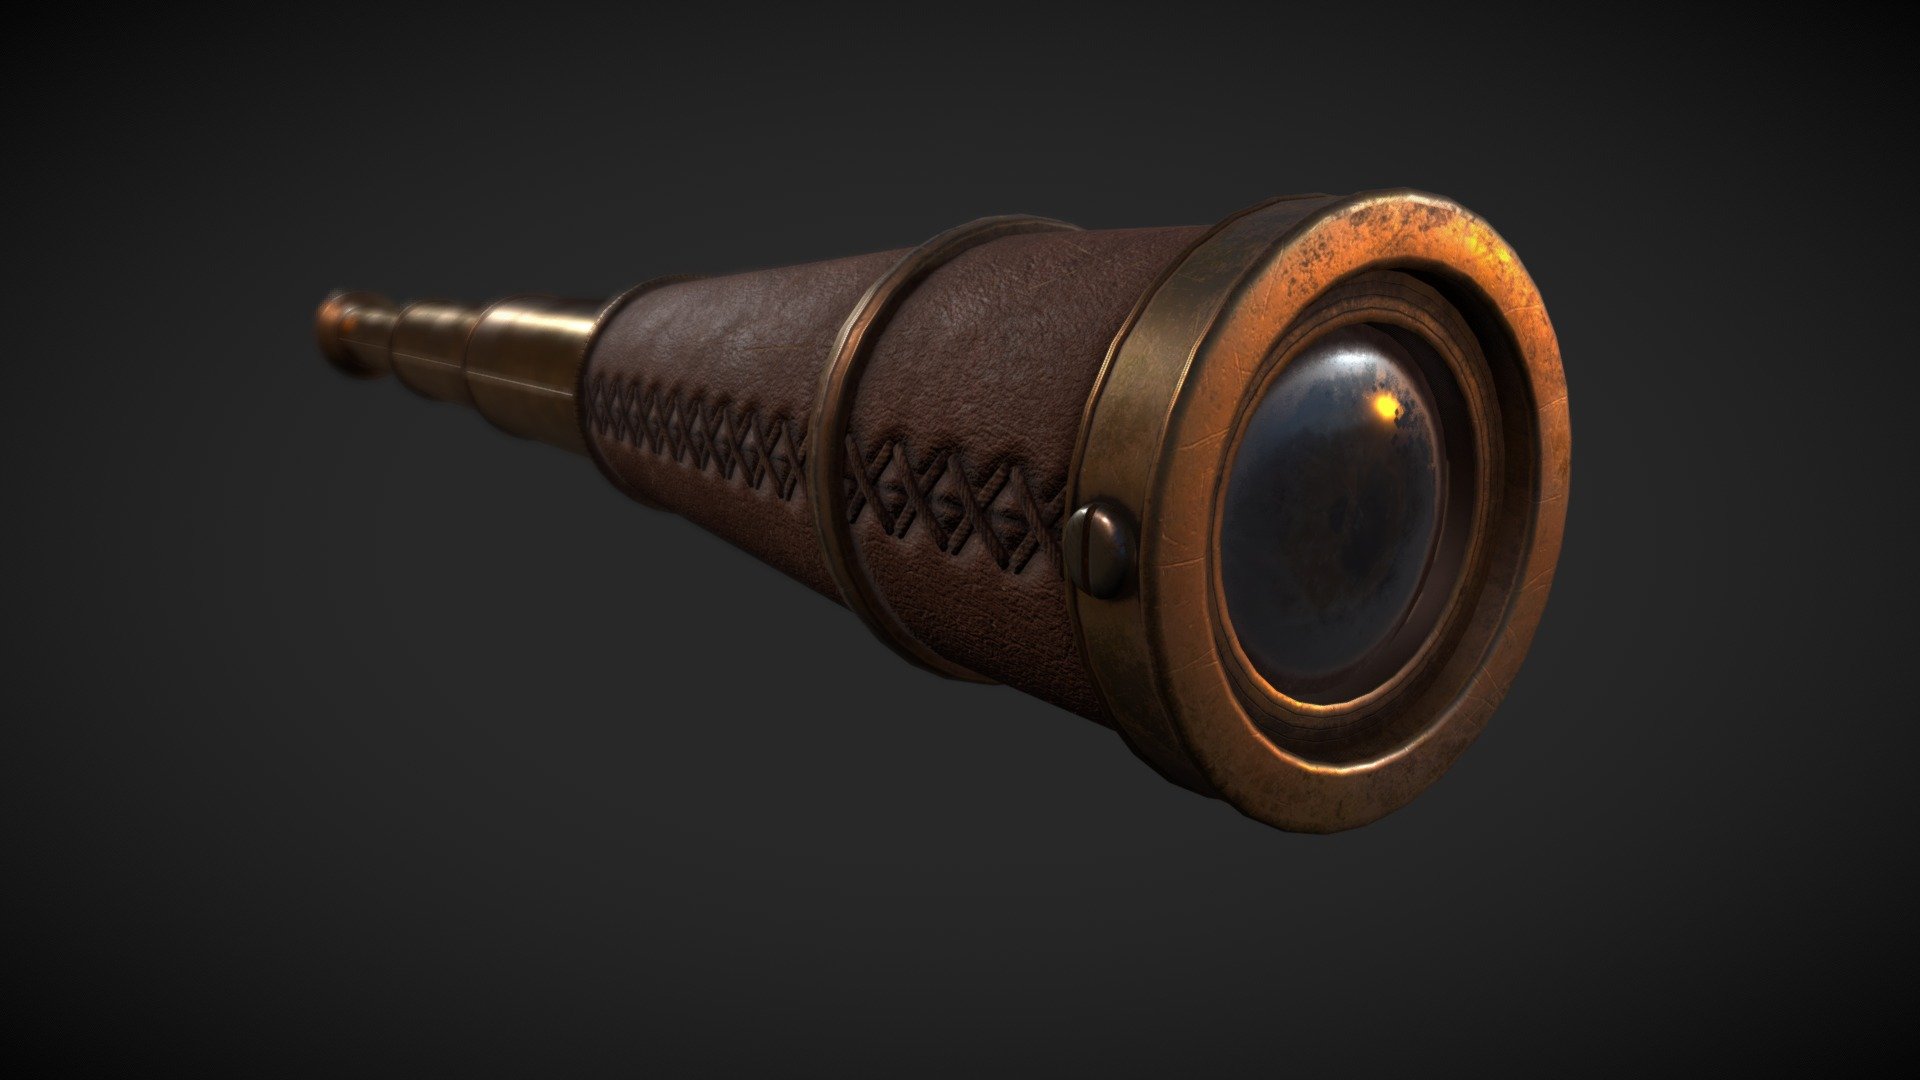 Textures created in Substance Painter and exported in .PNG PBR rough/metallic formats.
Logically named objects, materials and textures.
Modelled in Blender.2.92.
Rendered in Marmoset Toolbag.
Textured in Substance Painter.
Modelled to real world scales.
Fully and efficiently UV unwrapped.
Tested in Marmoset Viewer, Marmoset Toolbag, EEVEE and Cycles.
Simple rigging in all formats, But only .Blend has full bone constraints.

Formats included

.Blend (Native) (Rigged and constrained)
.FBX (Rigged)
.DAE (Rigged)
.OBJ (Rigged)

Objects included

SpyGlass

Textures included in .png format.
Spyglass


Base Colour
Roughness
Normal (OpenGL)
Metallic
Opacity

Poly Counts

Face count: 6,340
Vert count: 6,006
Triangulated count: 11,884
 - Spyglass - Buy Royalty Free 3D model by PBR3D 3d model